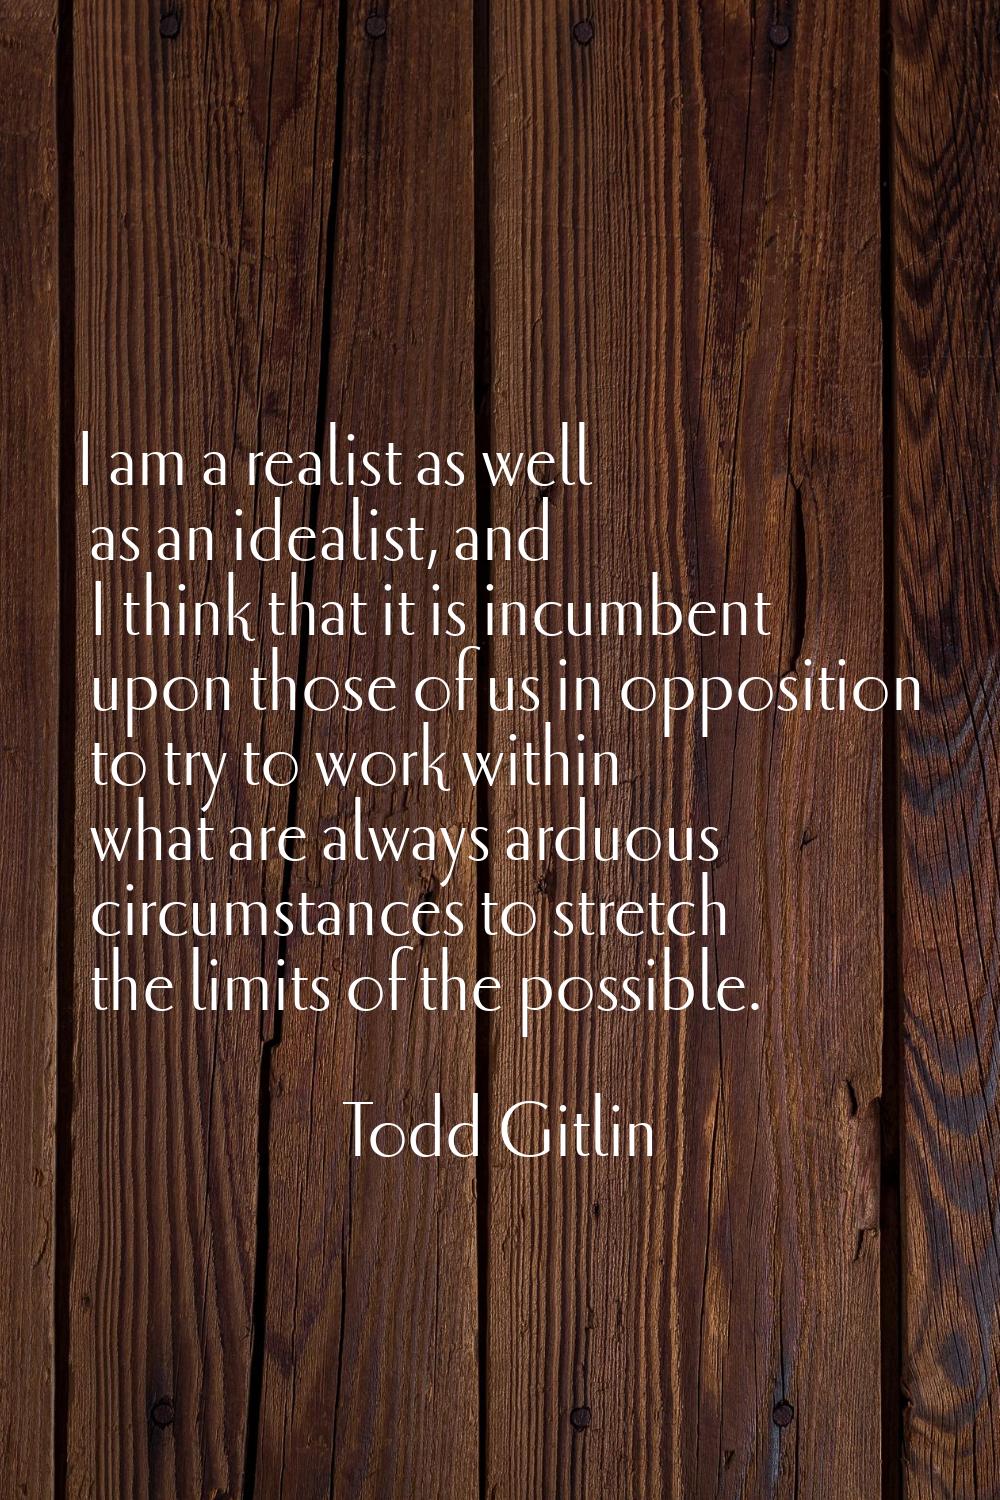 I am a realist as well as an idealist, and I think that it is incumbent upon those of us in opposit